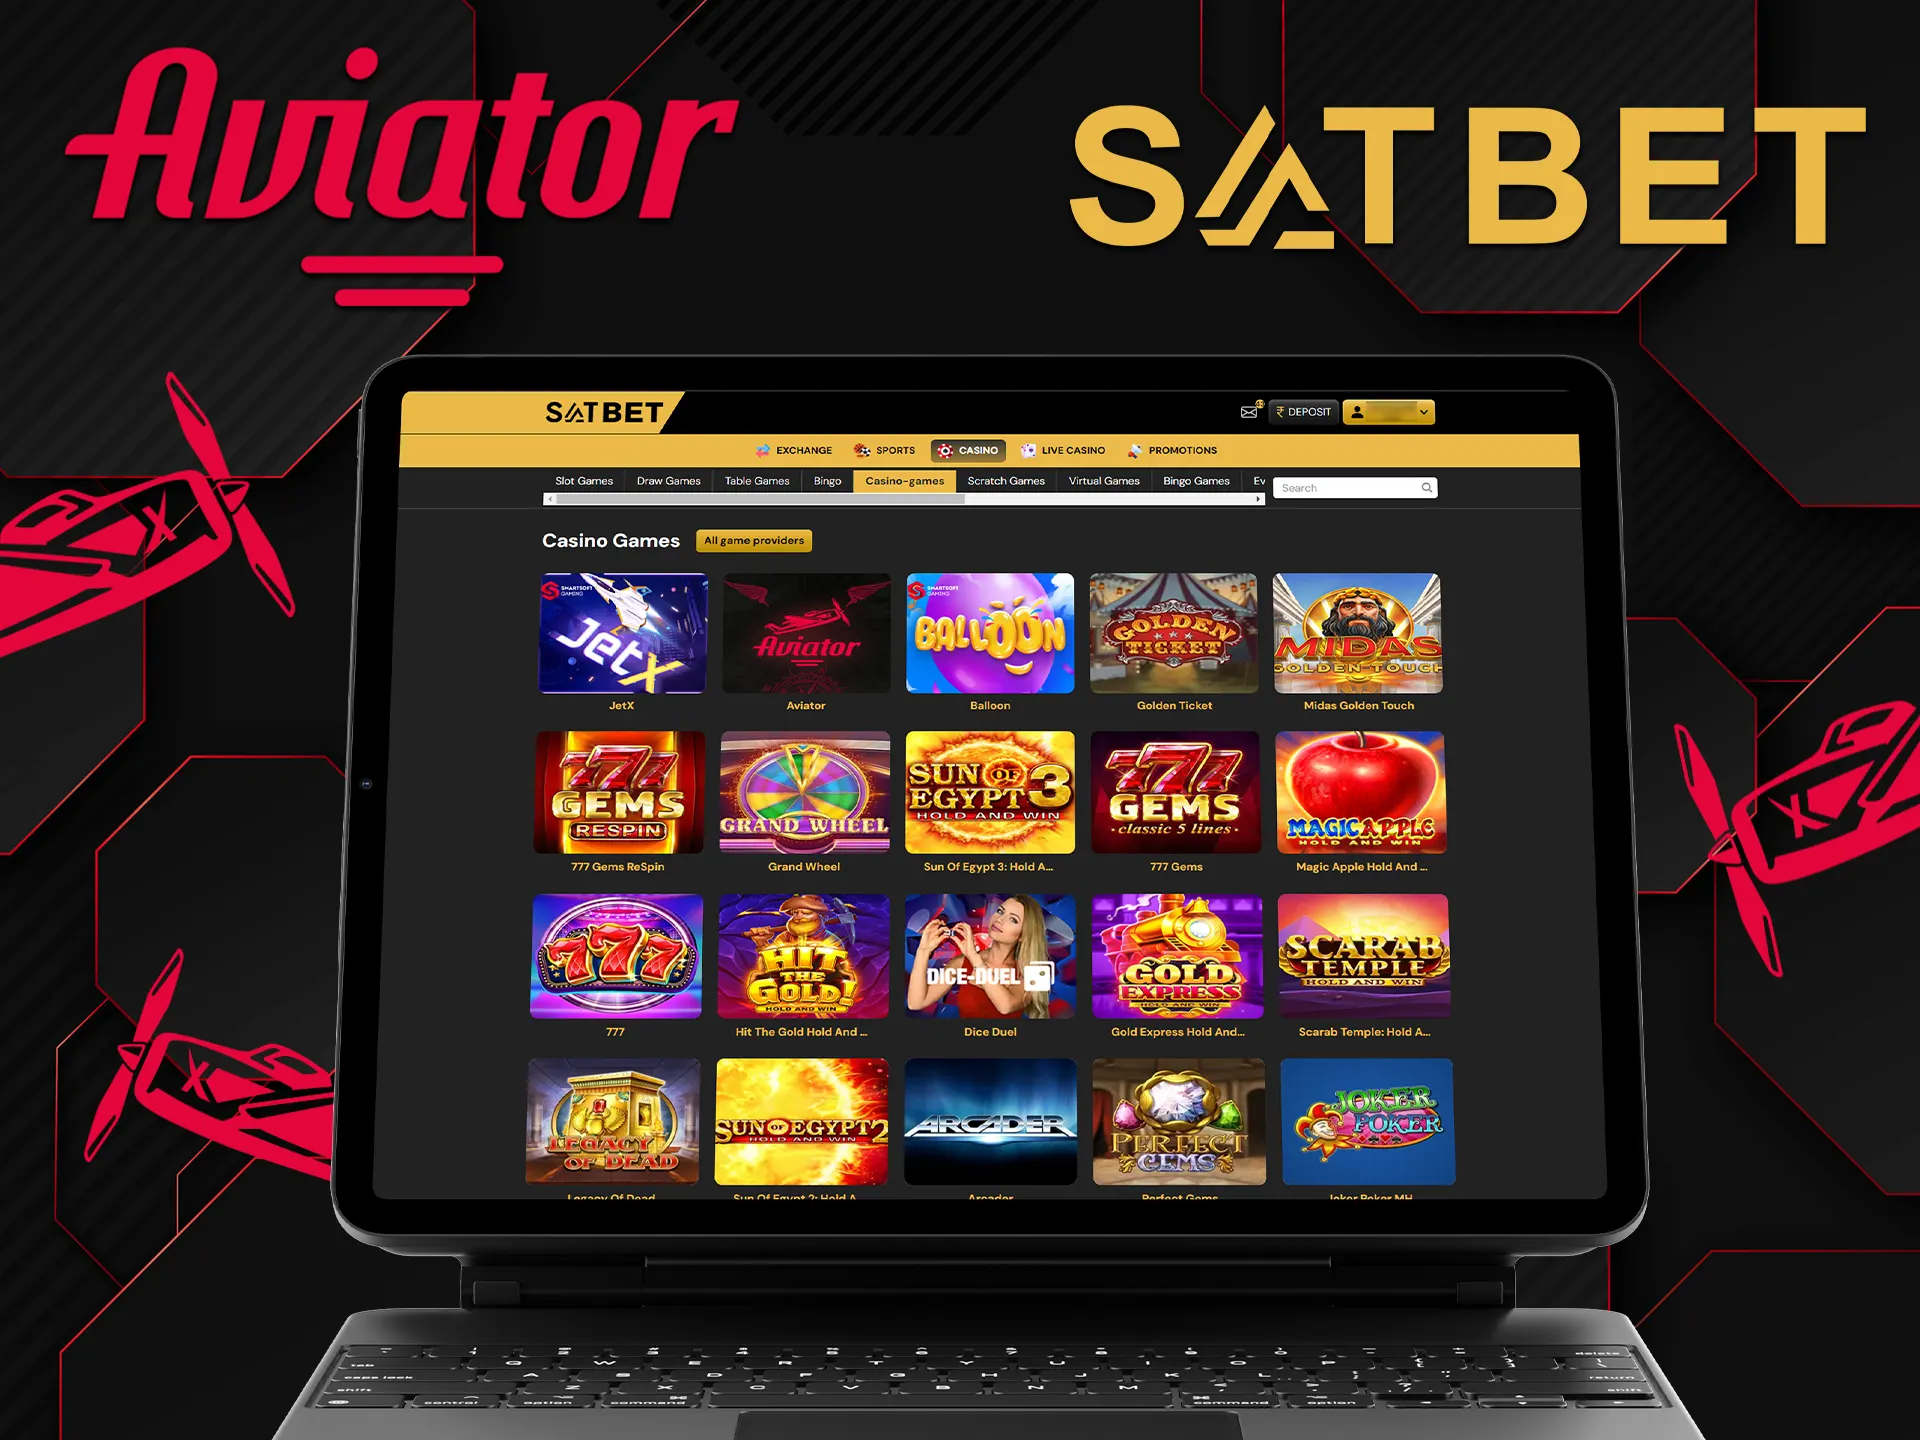 Find the section with recently added Satbet games and click on Aviator.